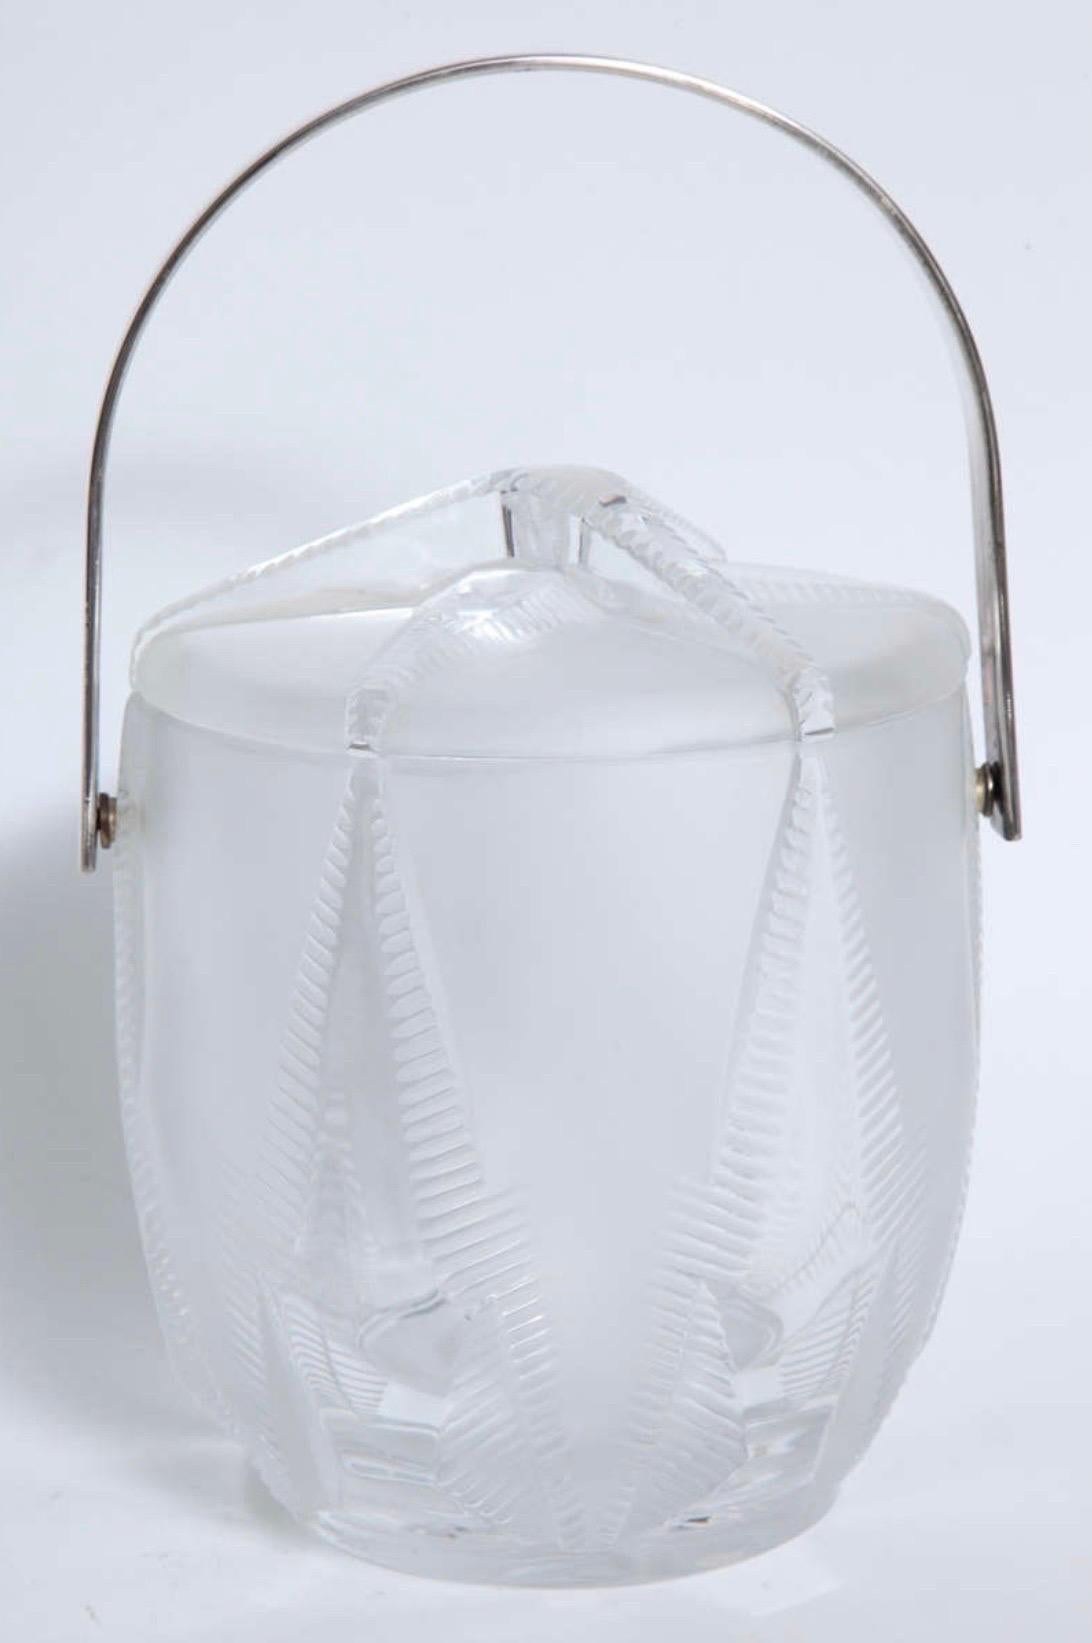 A fantastic Thermidor Lalique lidded ice bucket with nickel-plated handle and raised starfish design. The liner is removable a glass container can serve as a champagne or wine bucket.
Signed Lalique France